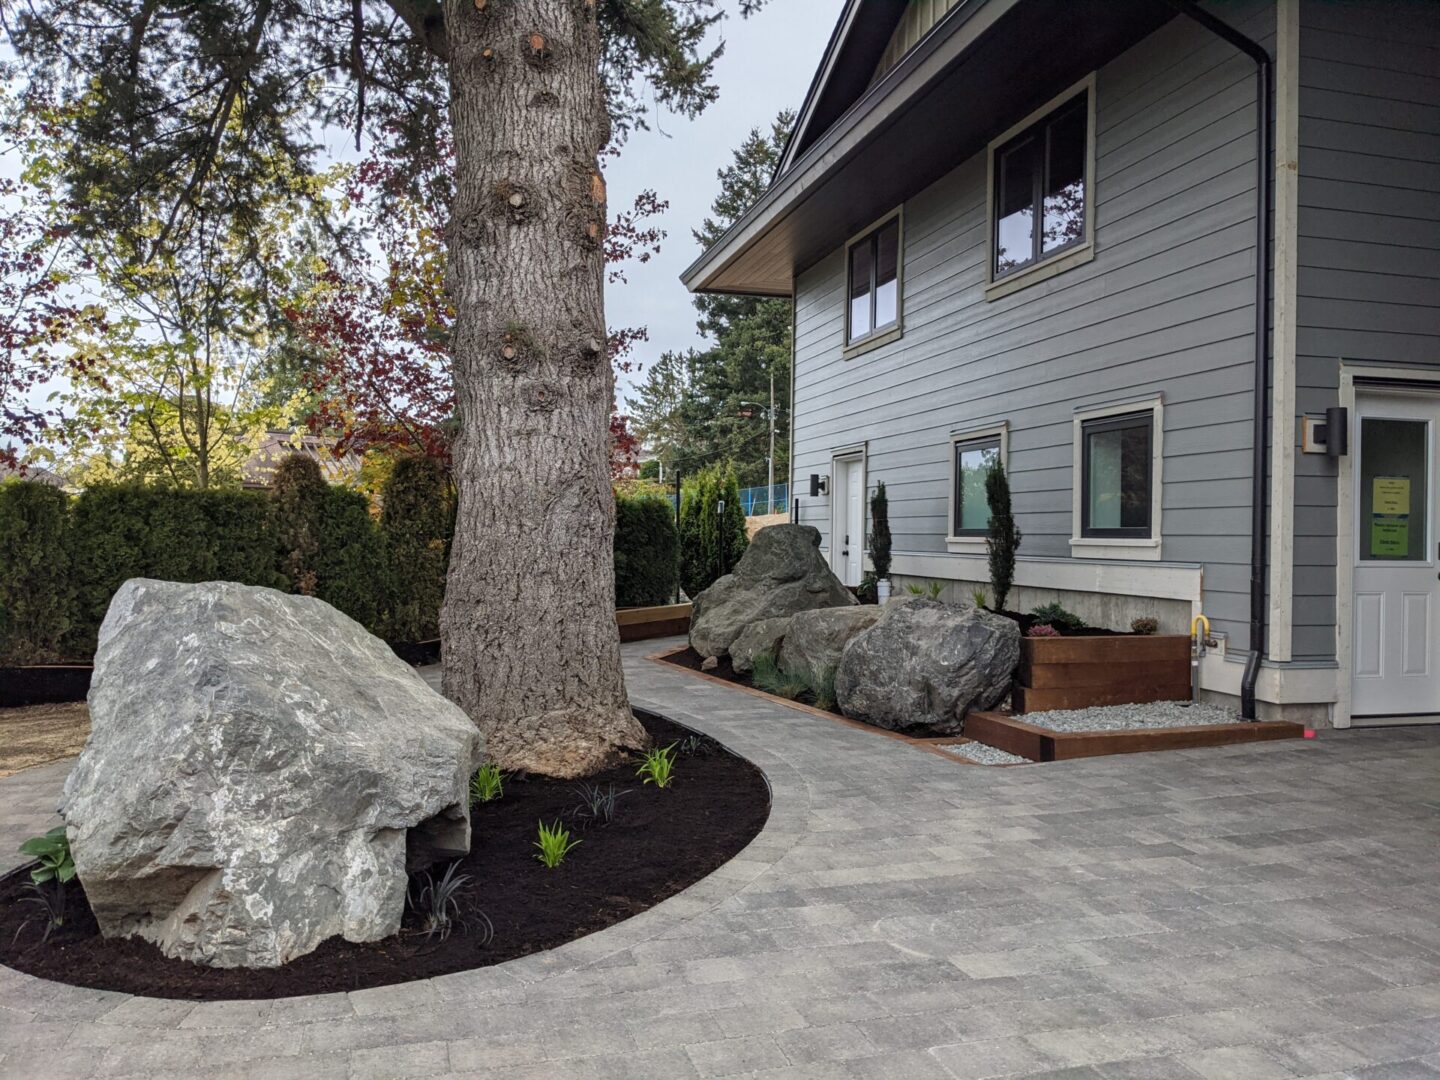 A modern gray house with landscaped front yard featuring large rocks, a tree, and a curved pathway.